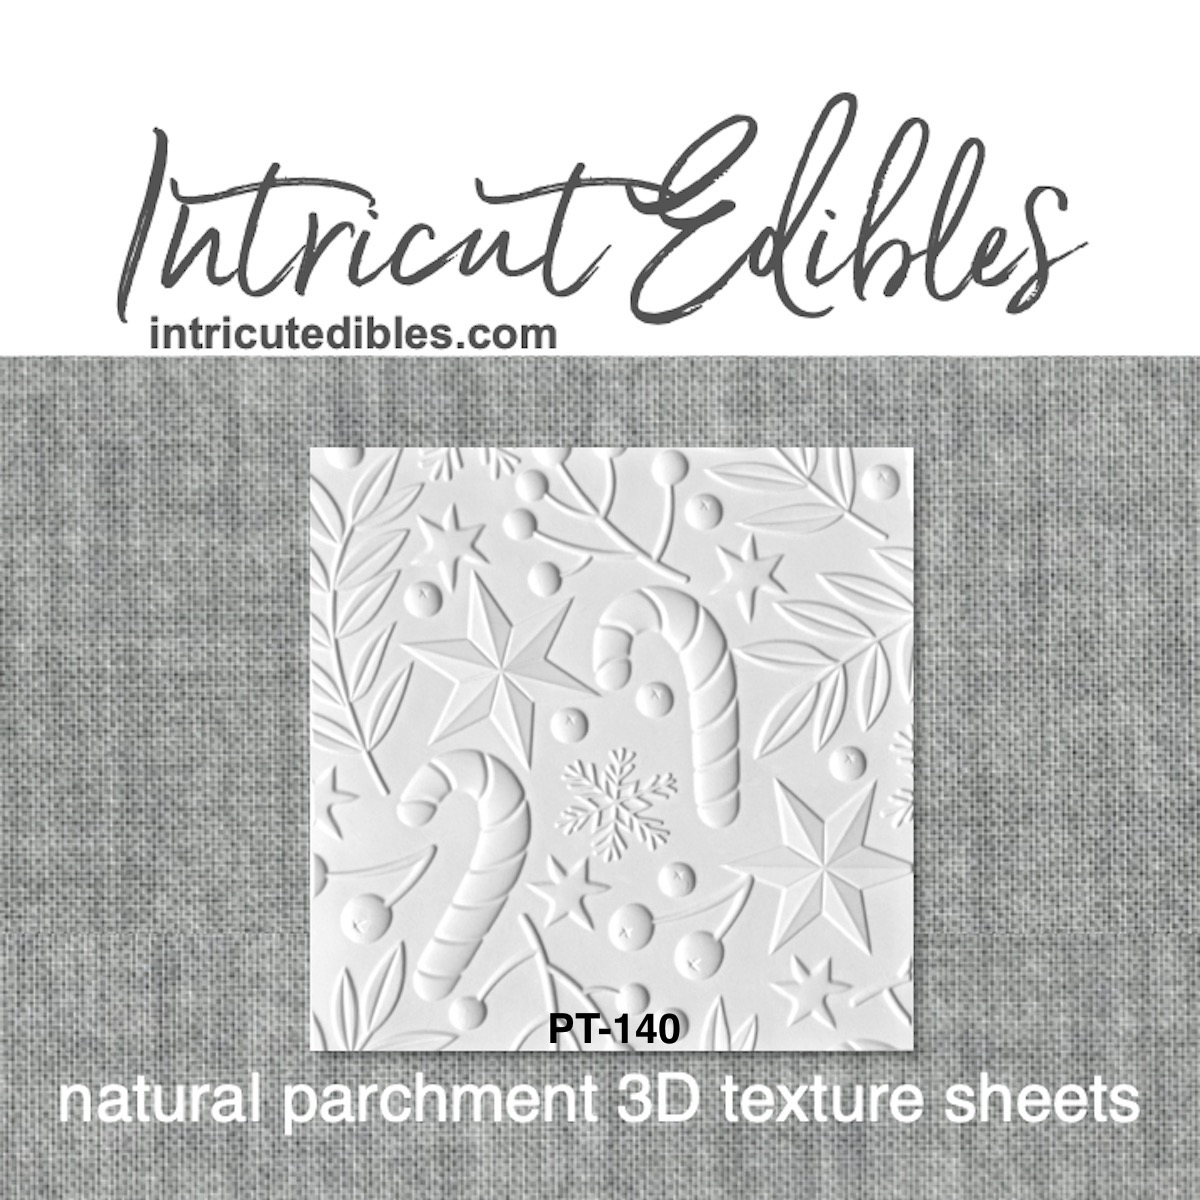 Parchment Texture Sheets - Christmas Candy Canes Greenery - Intricut Edibles